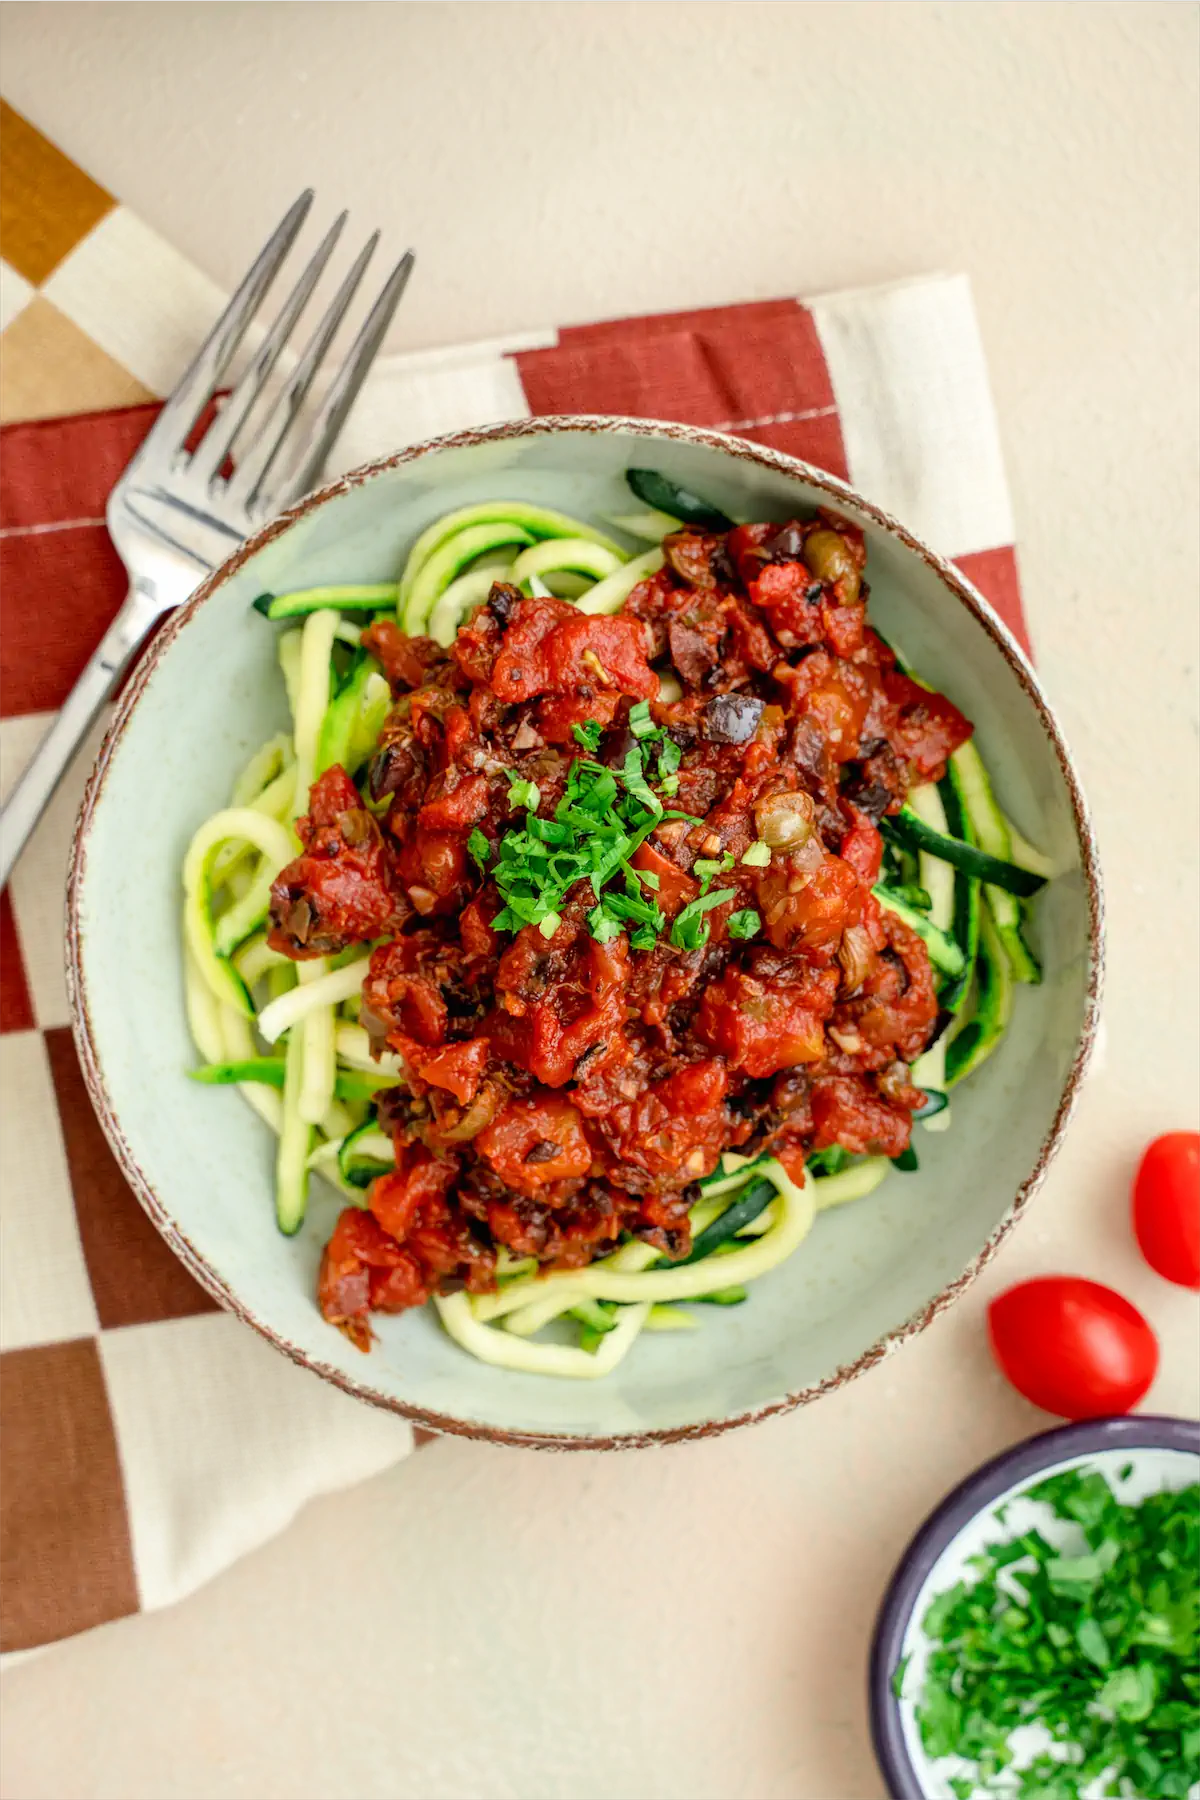 Keto tomato and anchovy based sauce and zucchini noodles served on a plate.